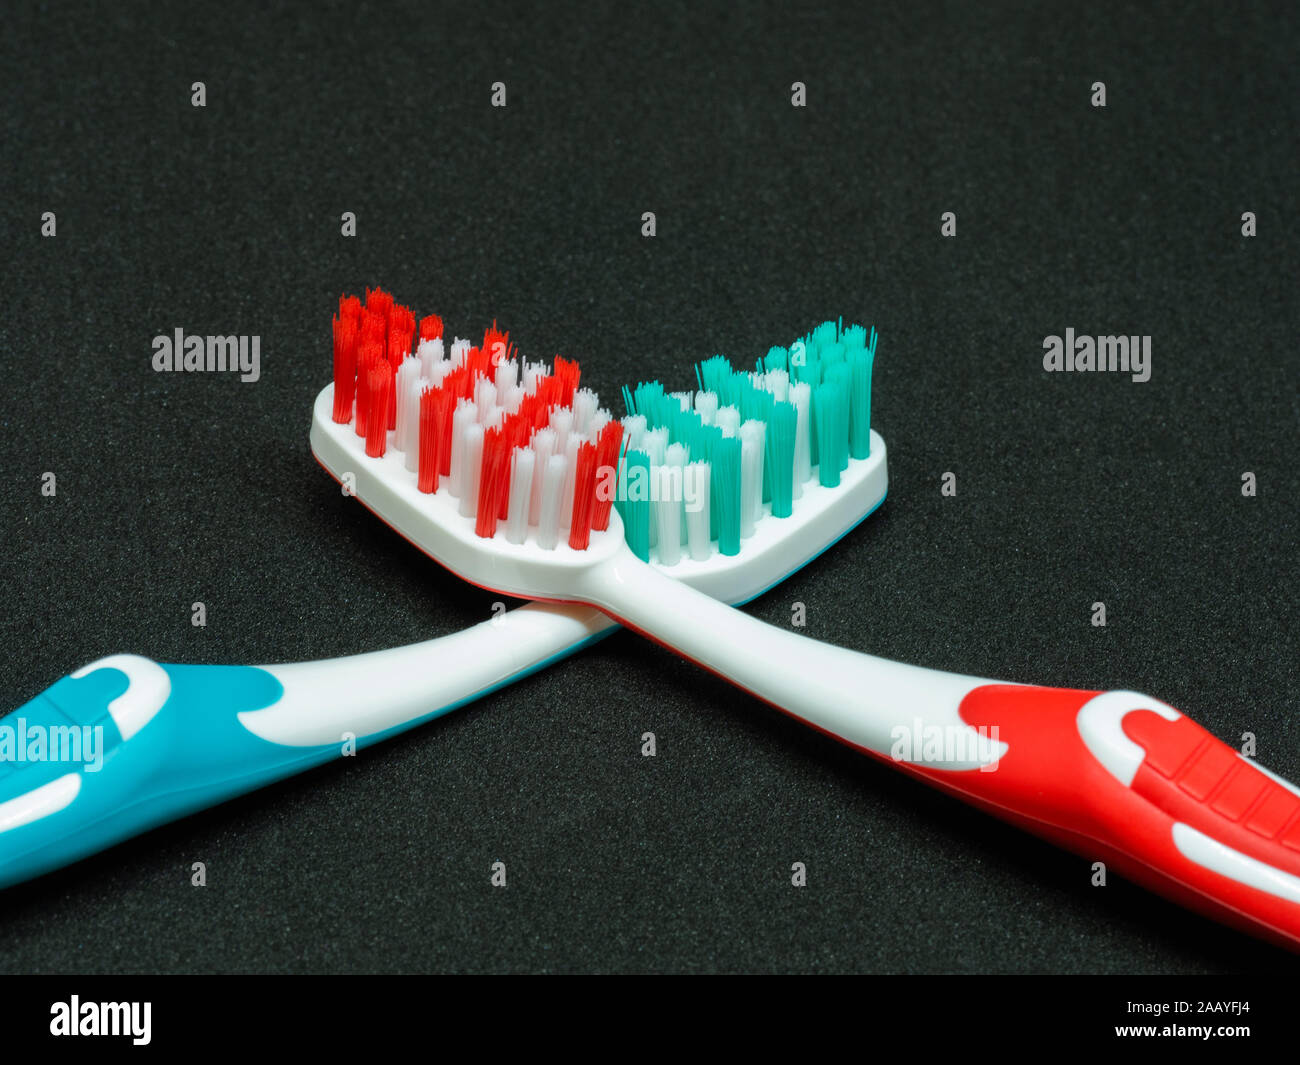 two-tone toothbrushes on dark background Stock Photo